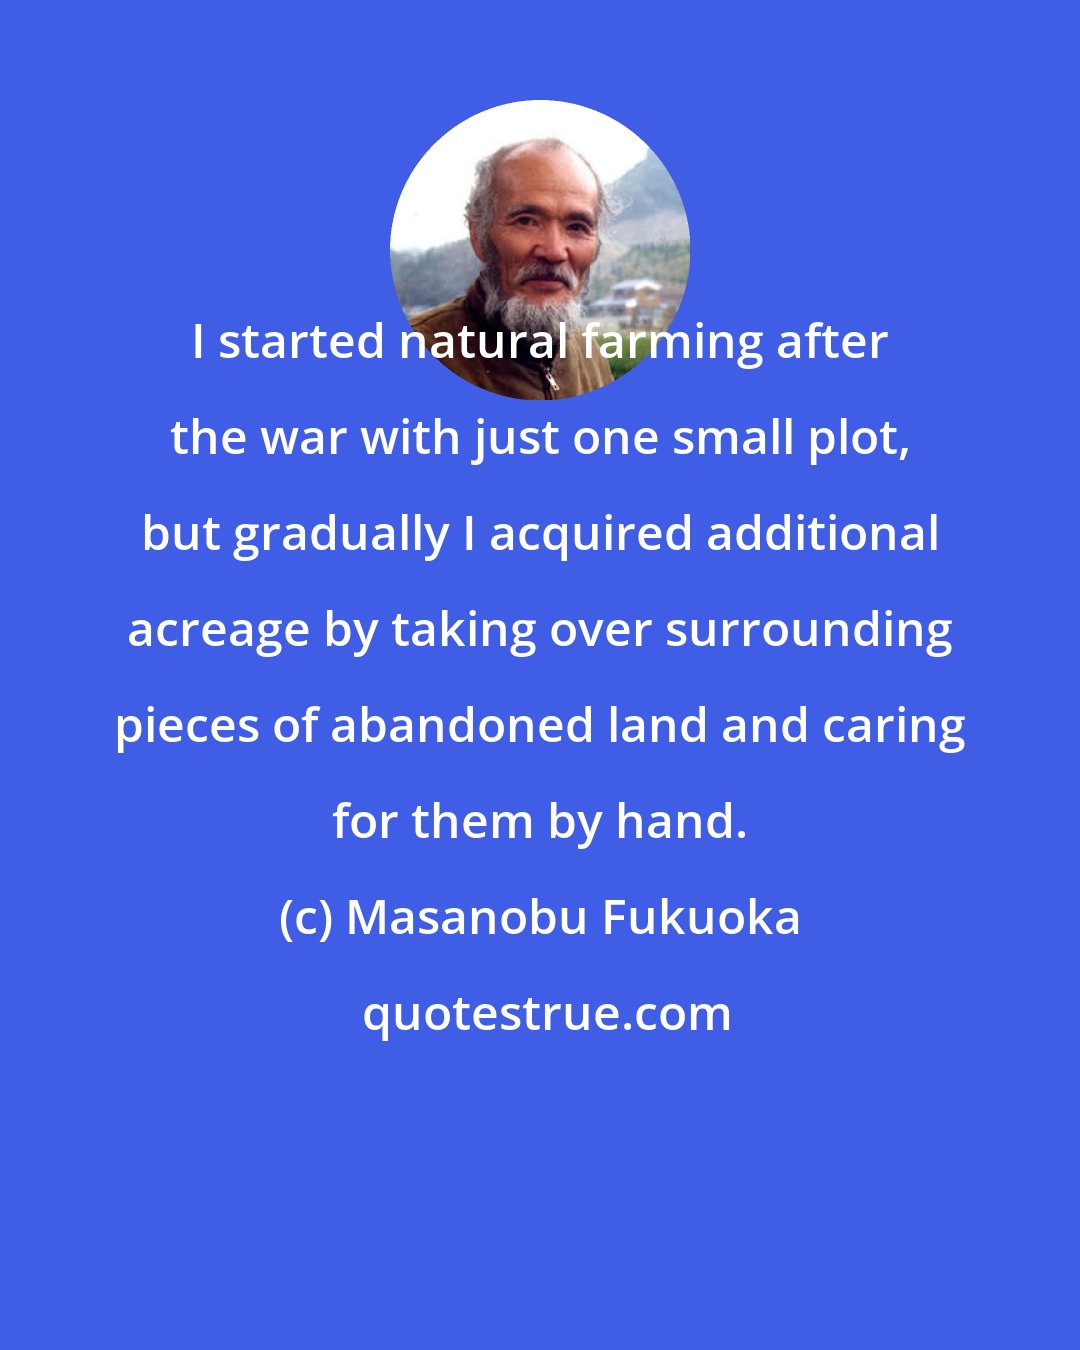 Masanobu Fukuoka: I started natural farming after the war with just one small plot, but gradually I acquired additional acreage by taking over surrounding pieces of abandoned land and caring for them by hand.